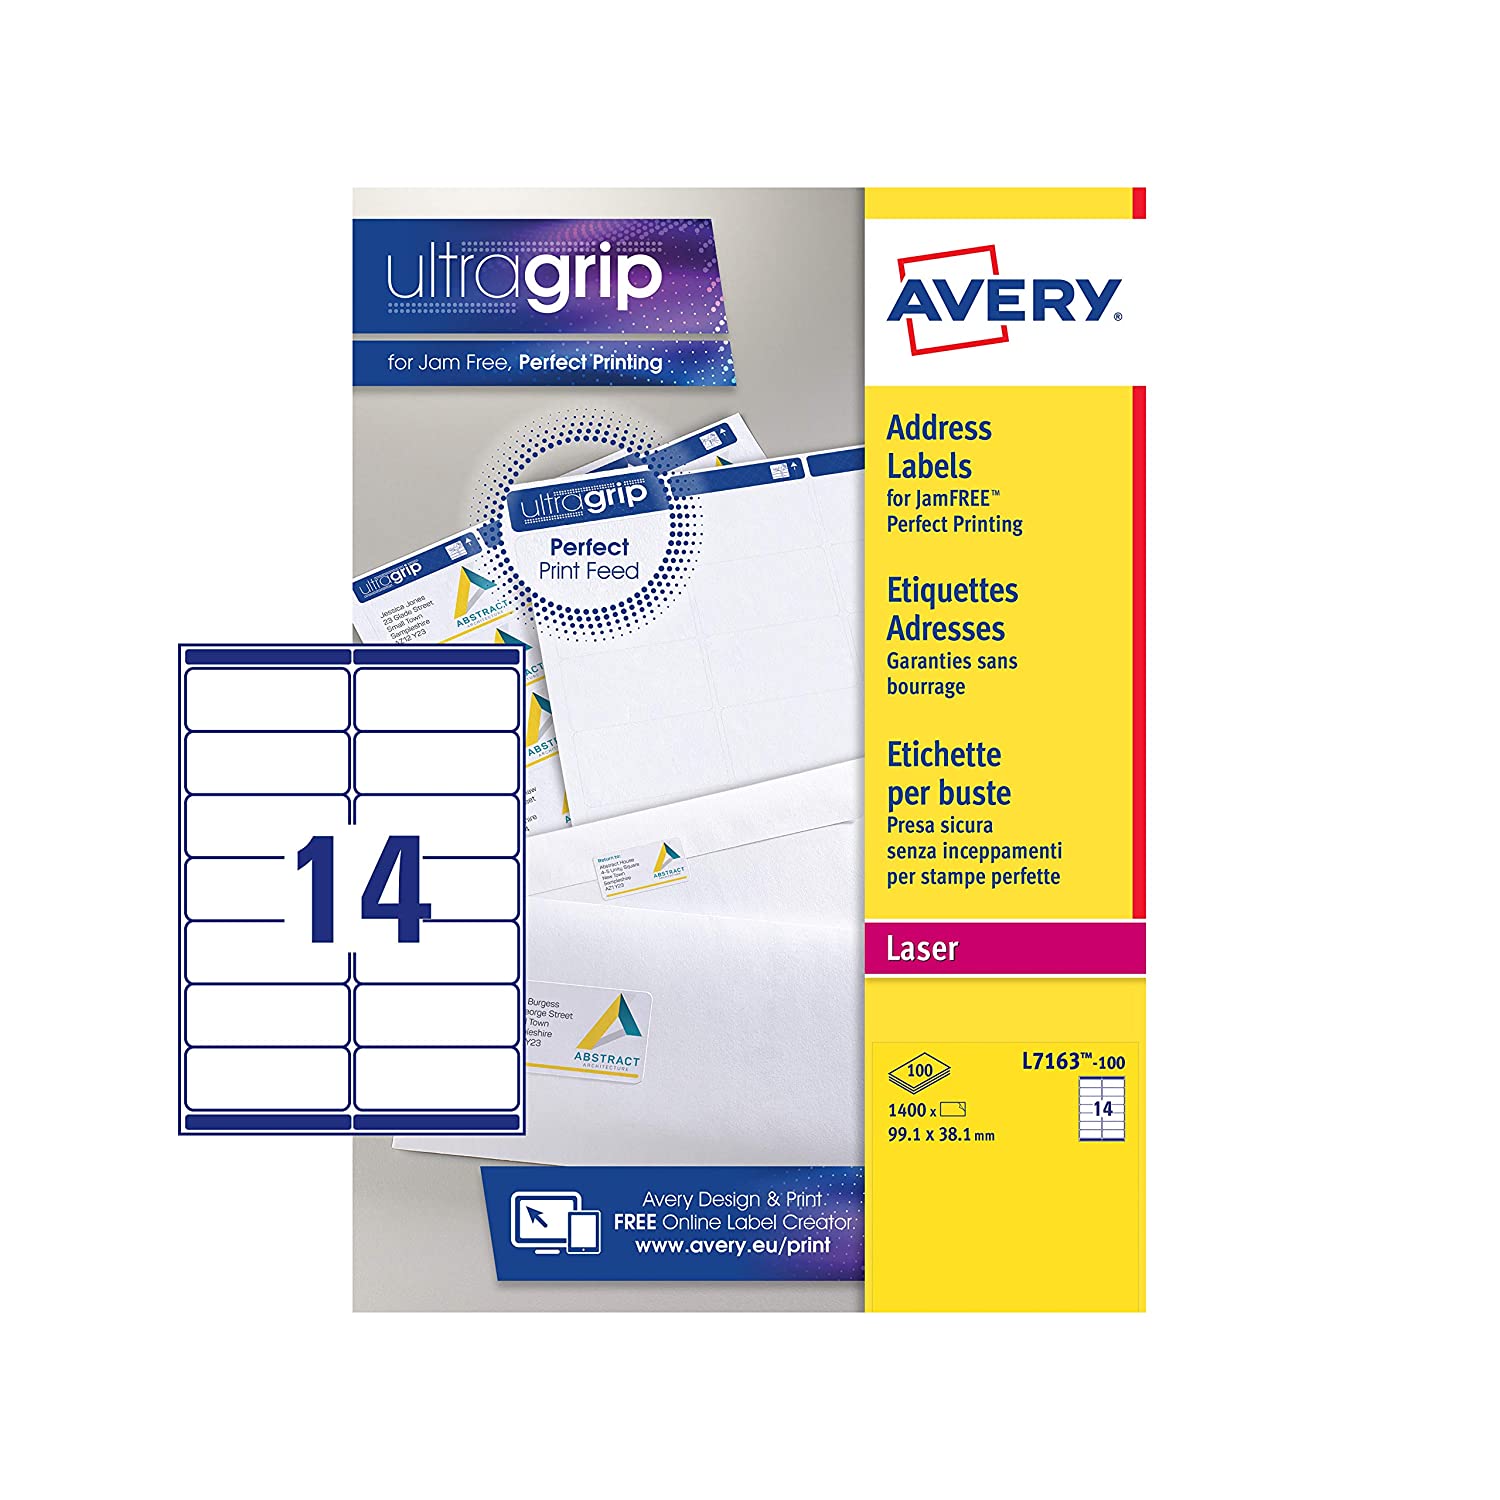 avery designpro 5.4 limited edition download